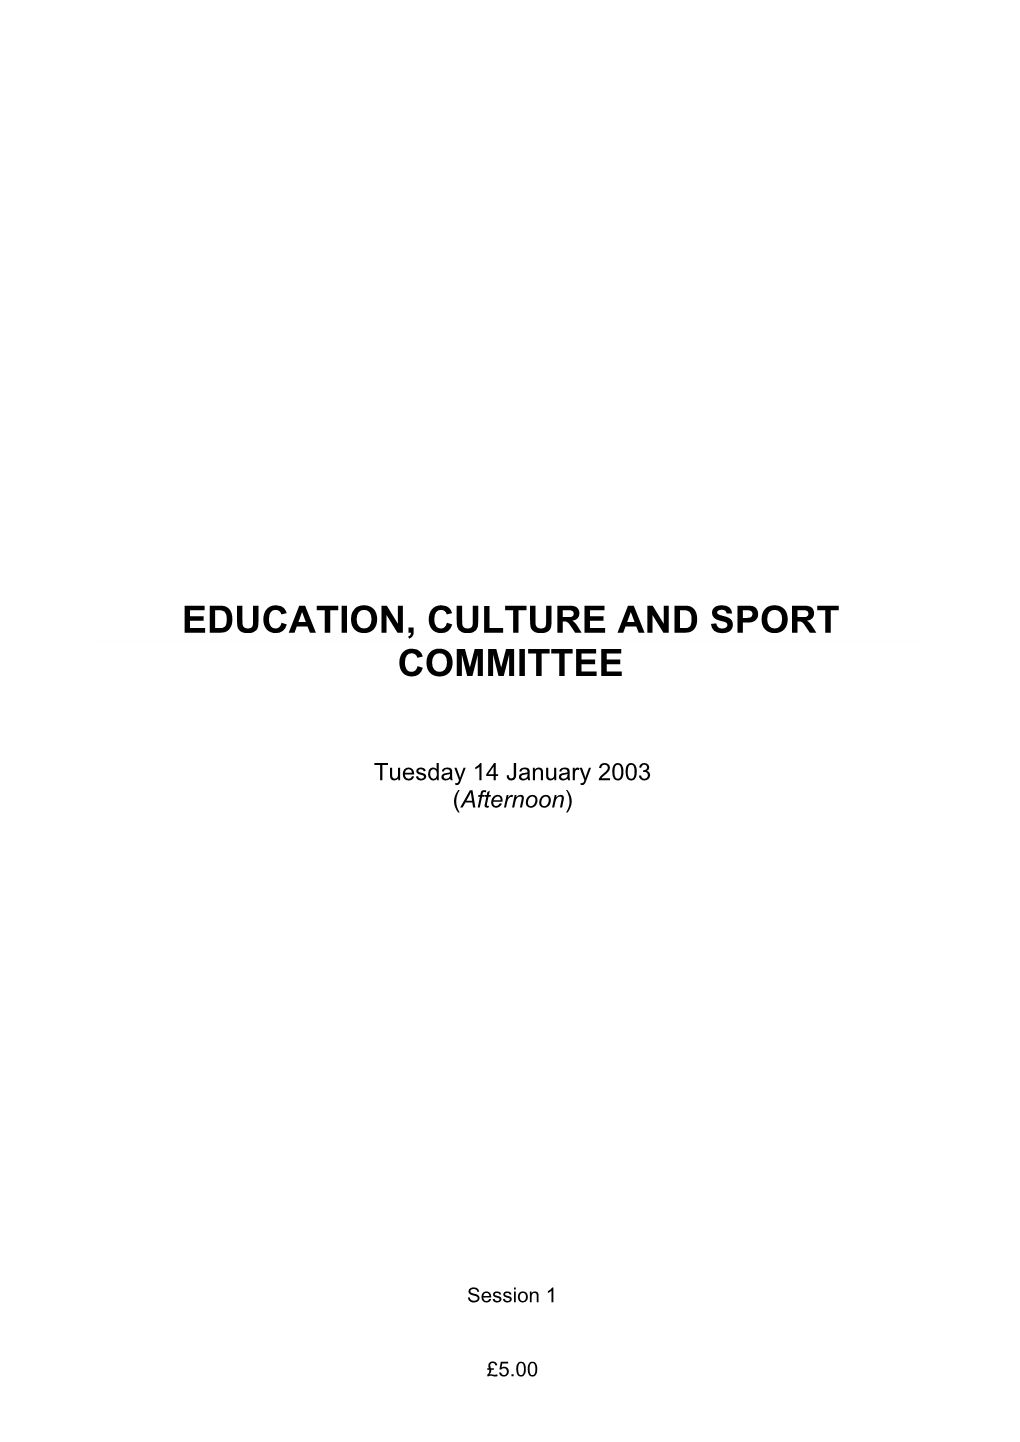 Education, Culture and Sport Committee